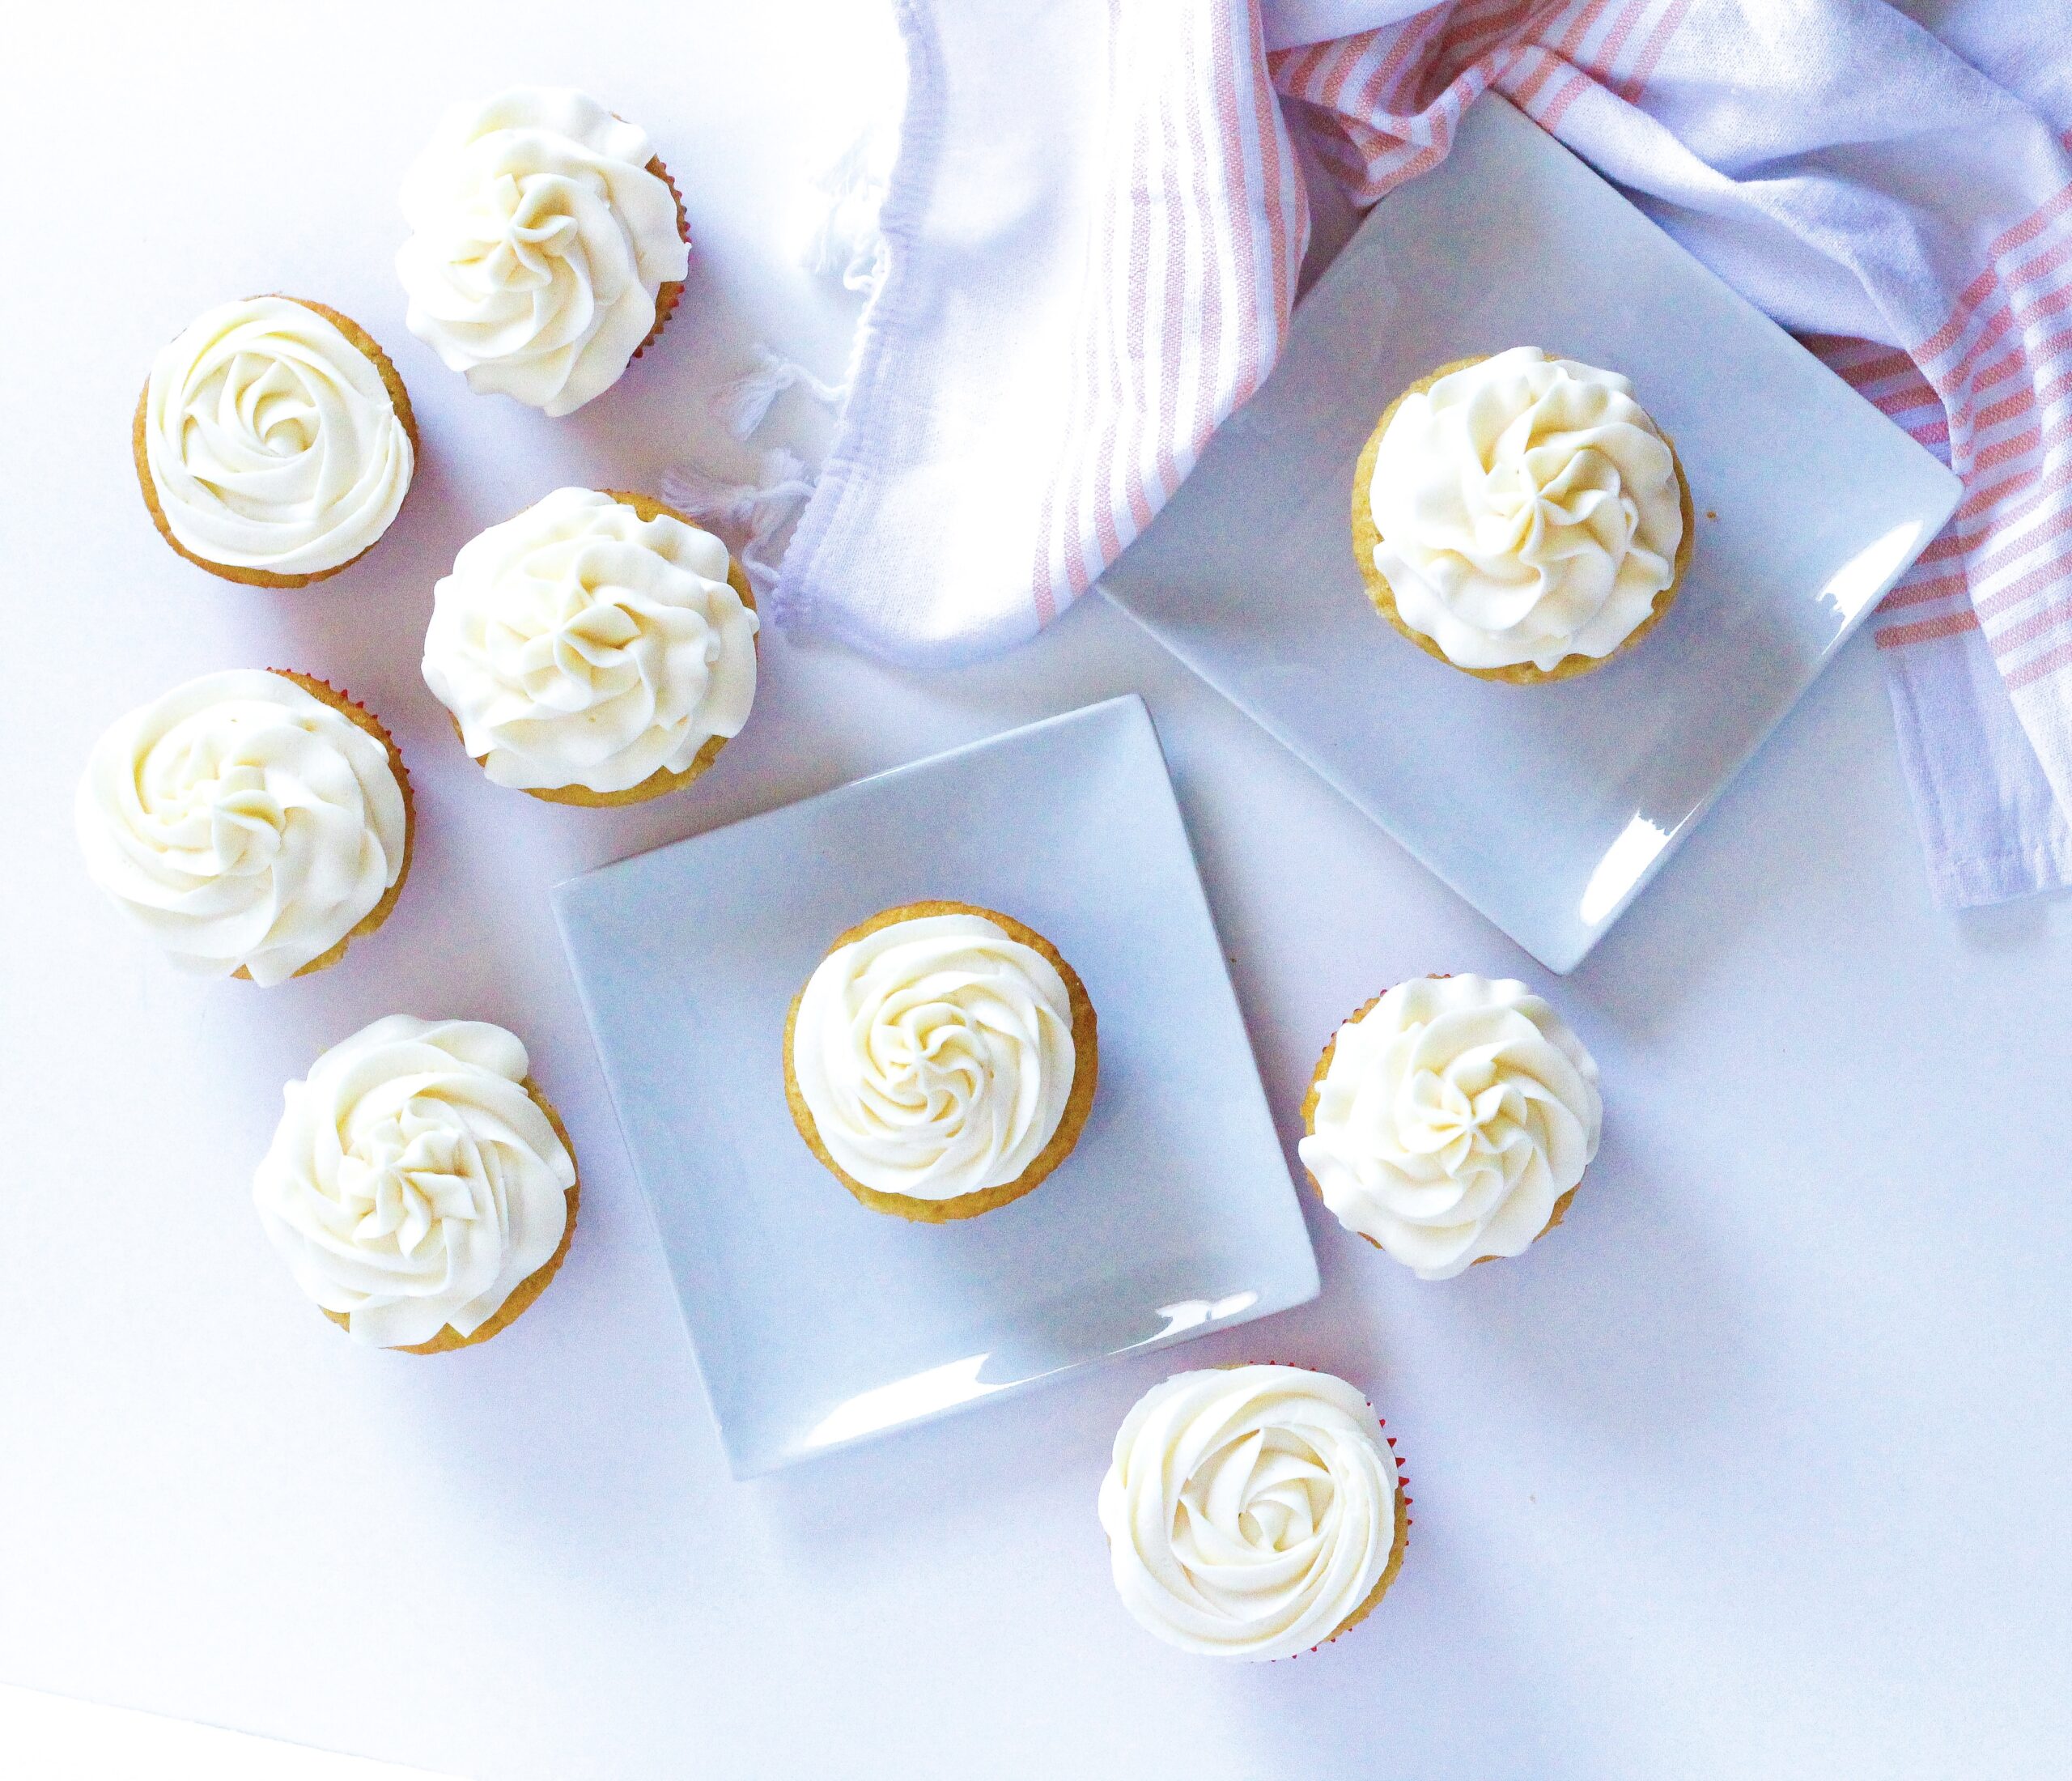 top down view of wannamango cupcakes on a white surface, each of two cupcakes are on square white plate. In the top right corner of the frame is a white and peach colored cloth napkin.